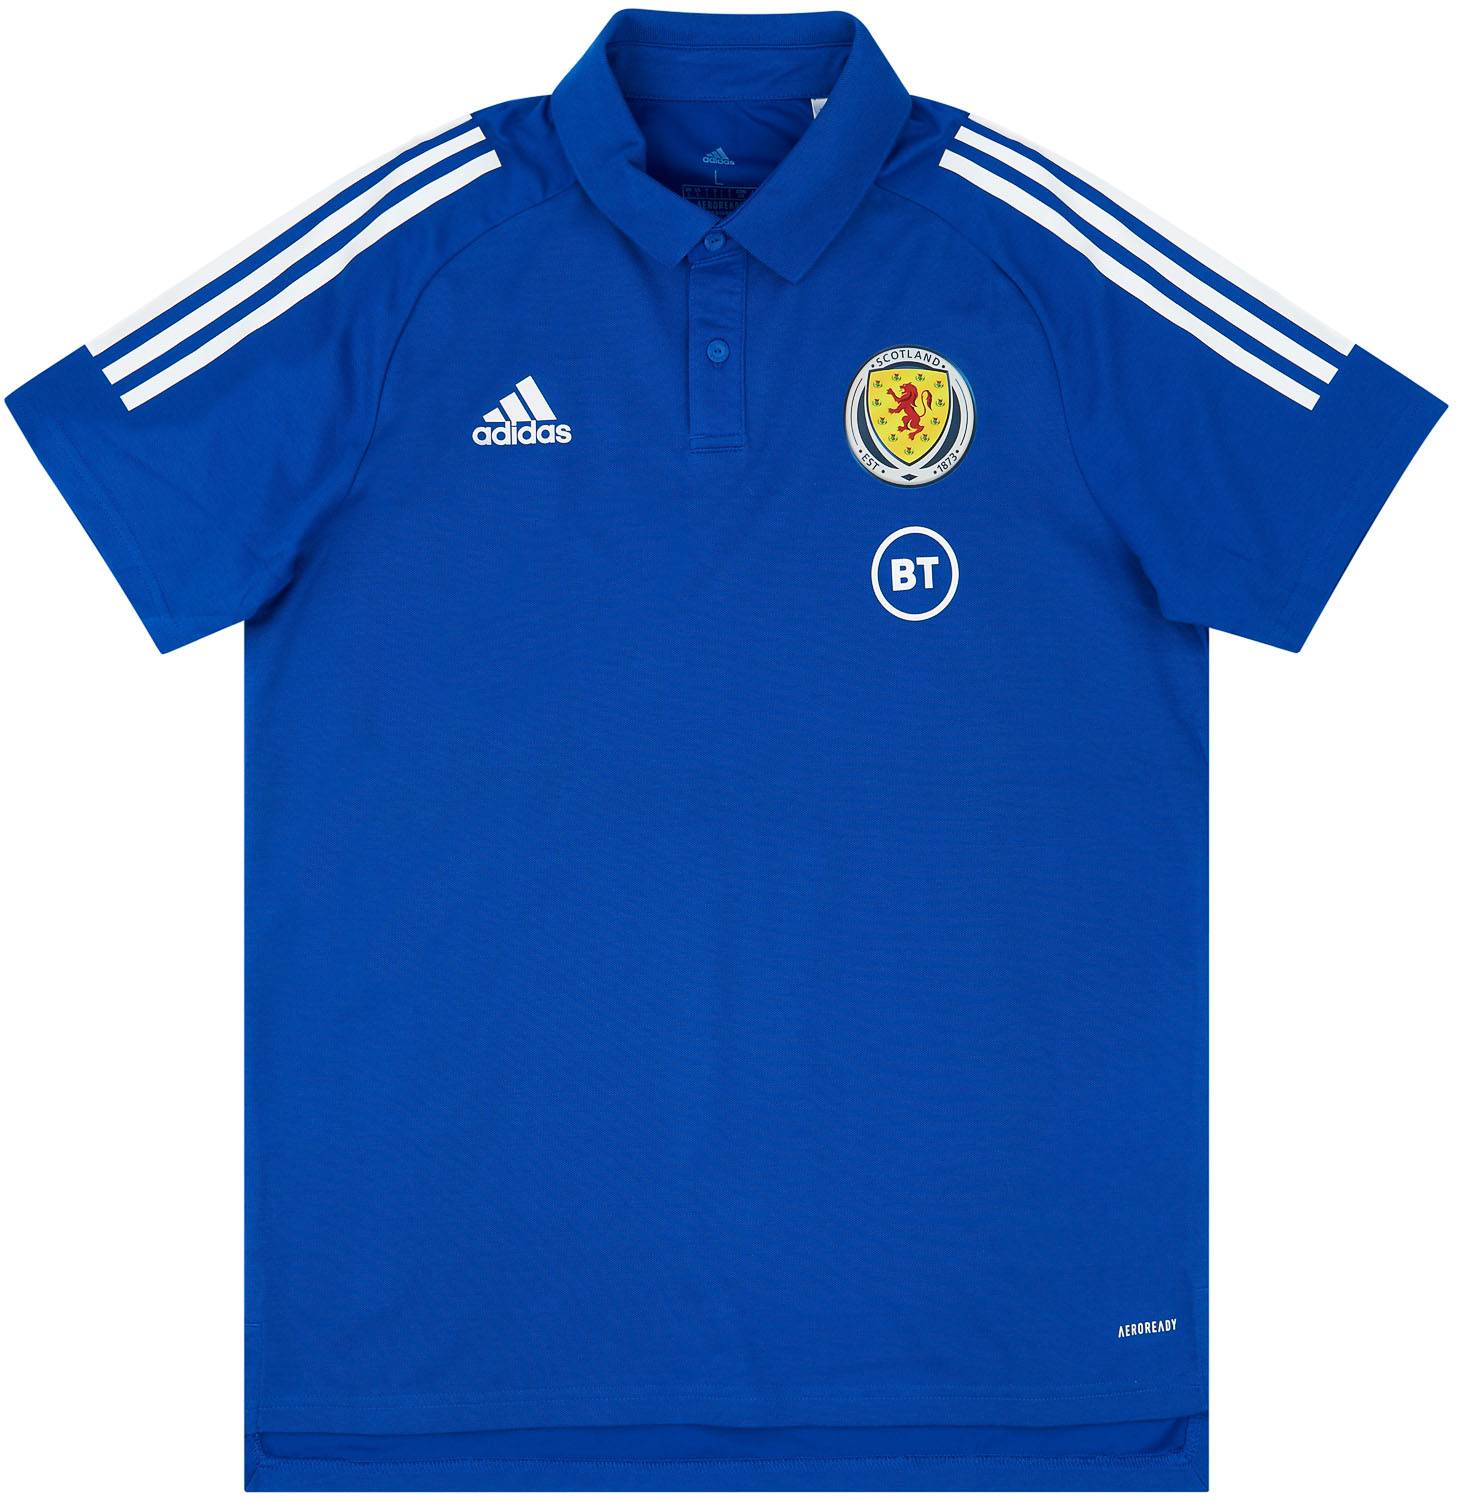 2020-21 Scotland Player Issue Polo T-Shirt (Very Good)